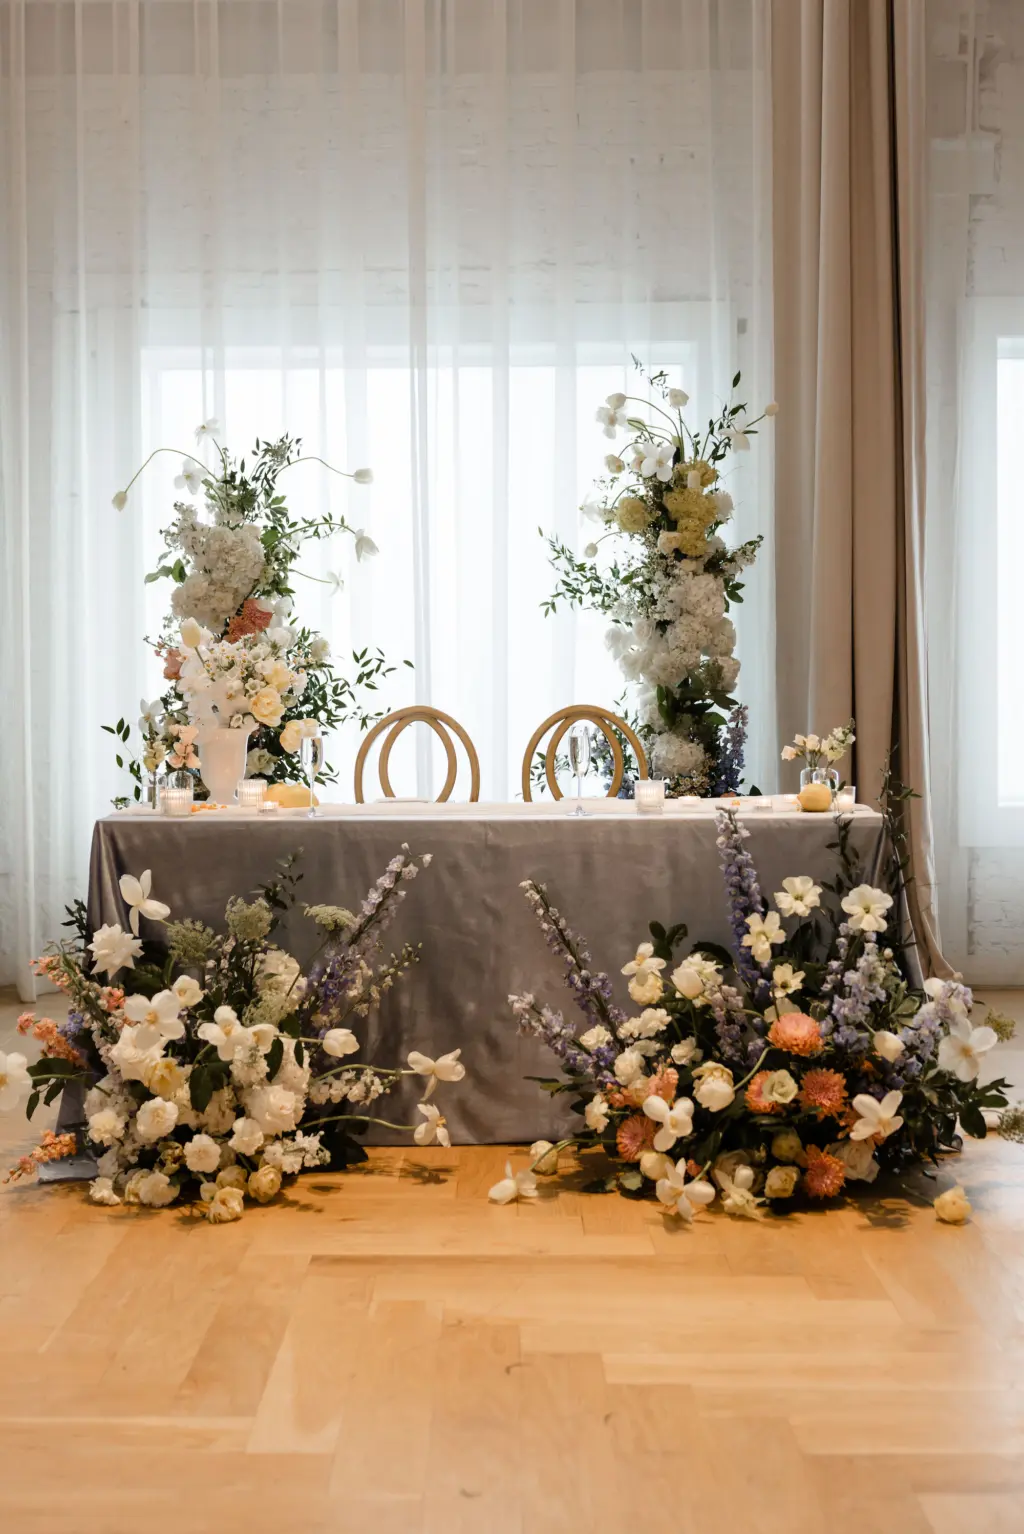 Spring Inspired Sweetheart Table with Gray Linen and White Orchid, Roses, Blue Stock Flowers, Hydrangeas, and Orange Chrysanthemums Wedding Reception Backdrops and Floor Arrangements